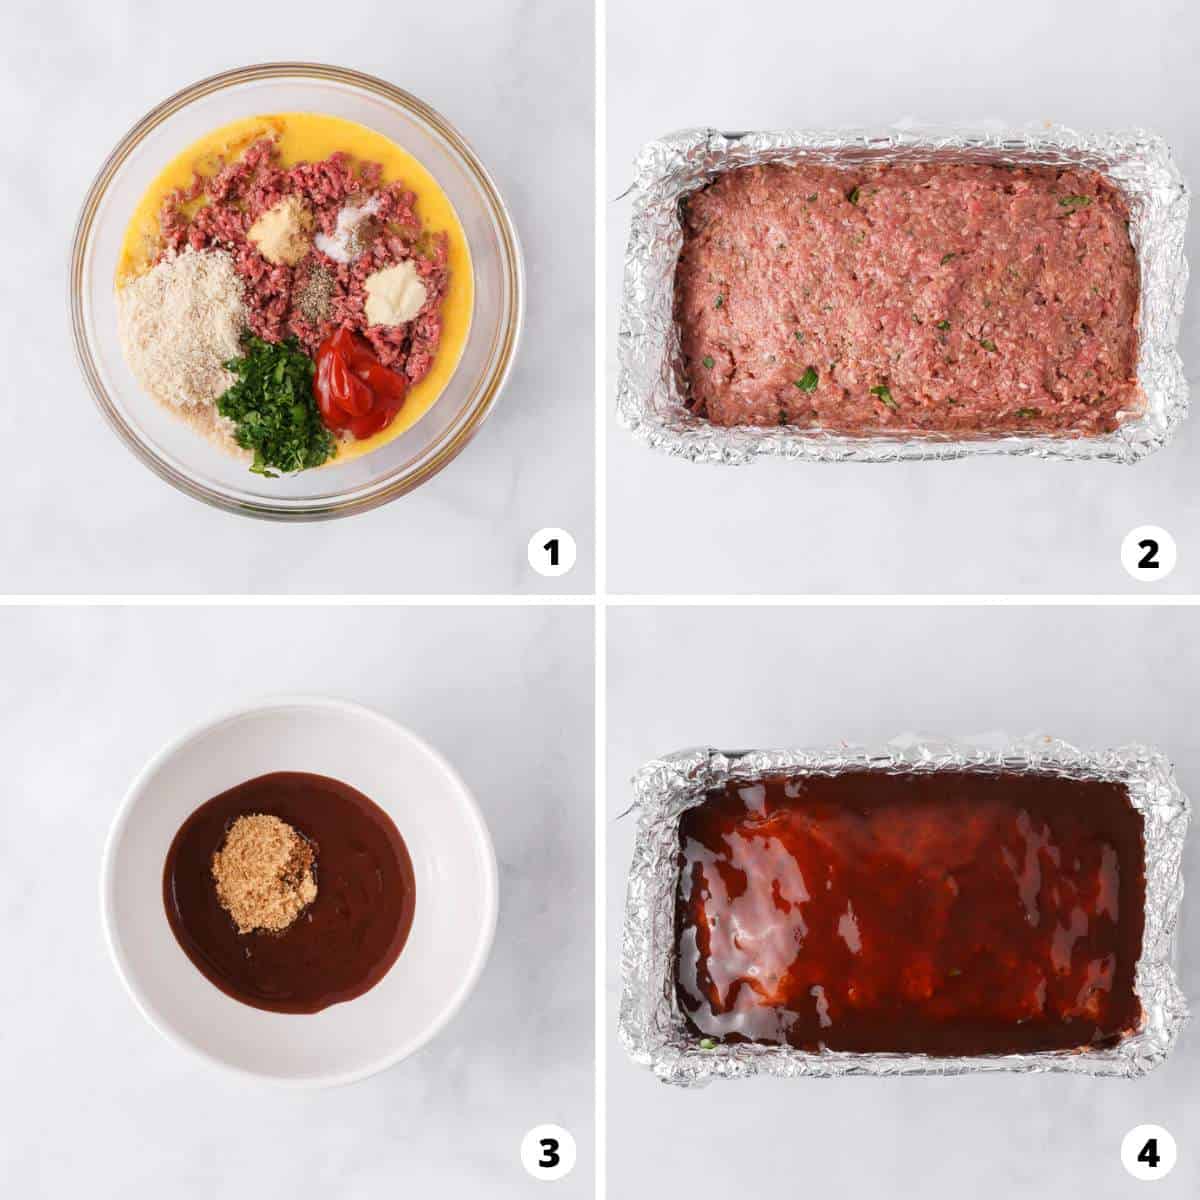 Showing how to make bbq meatloaf in a 4 step collage.